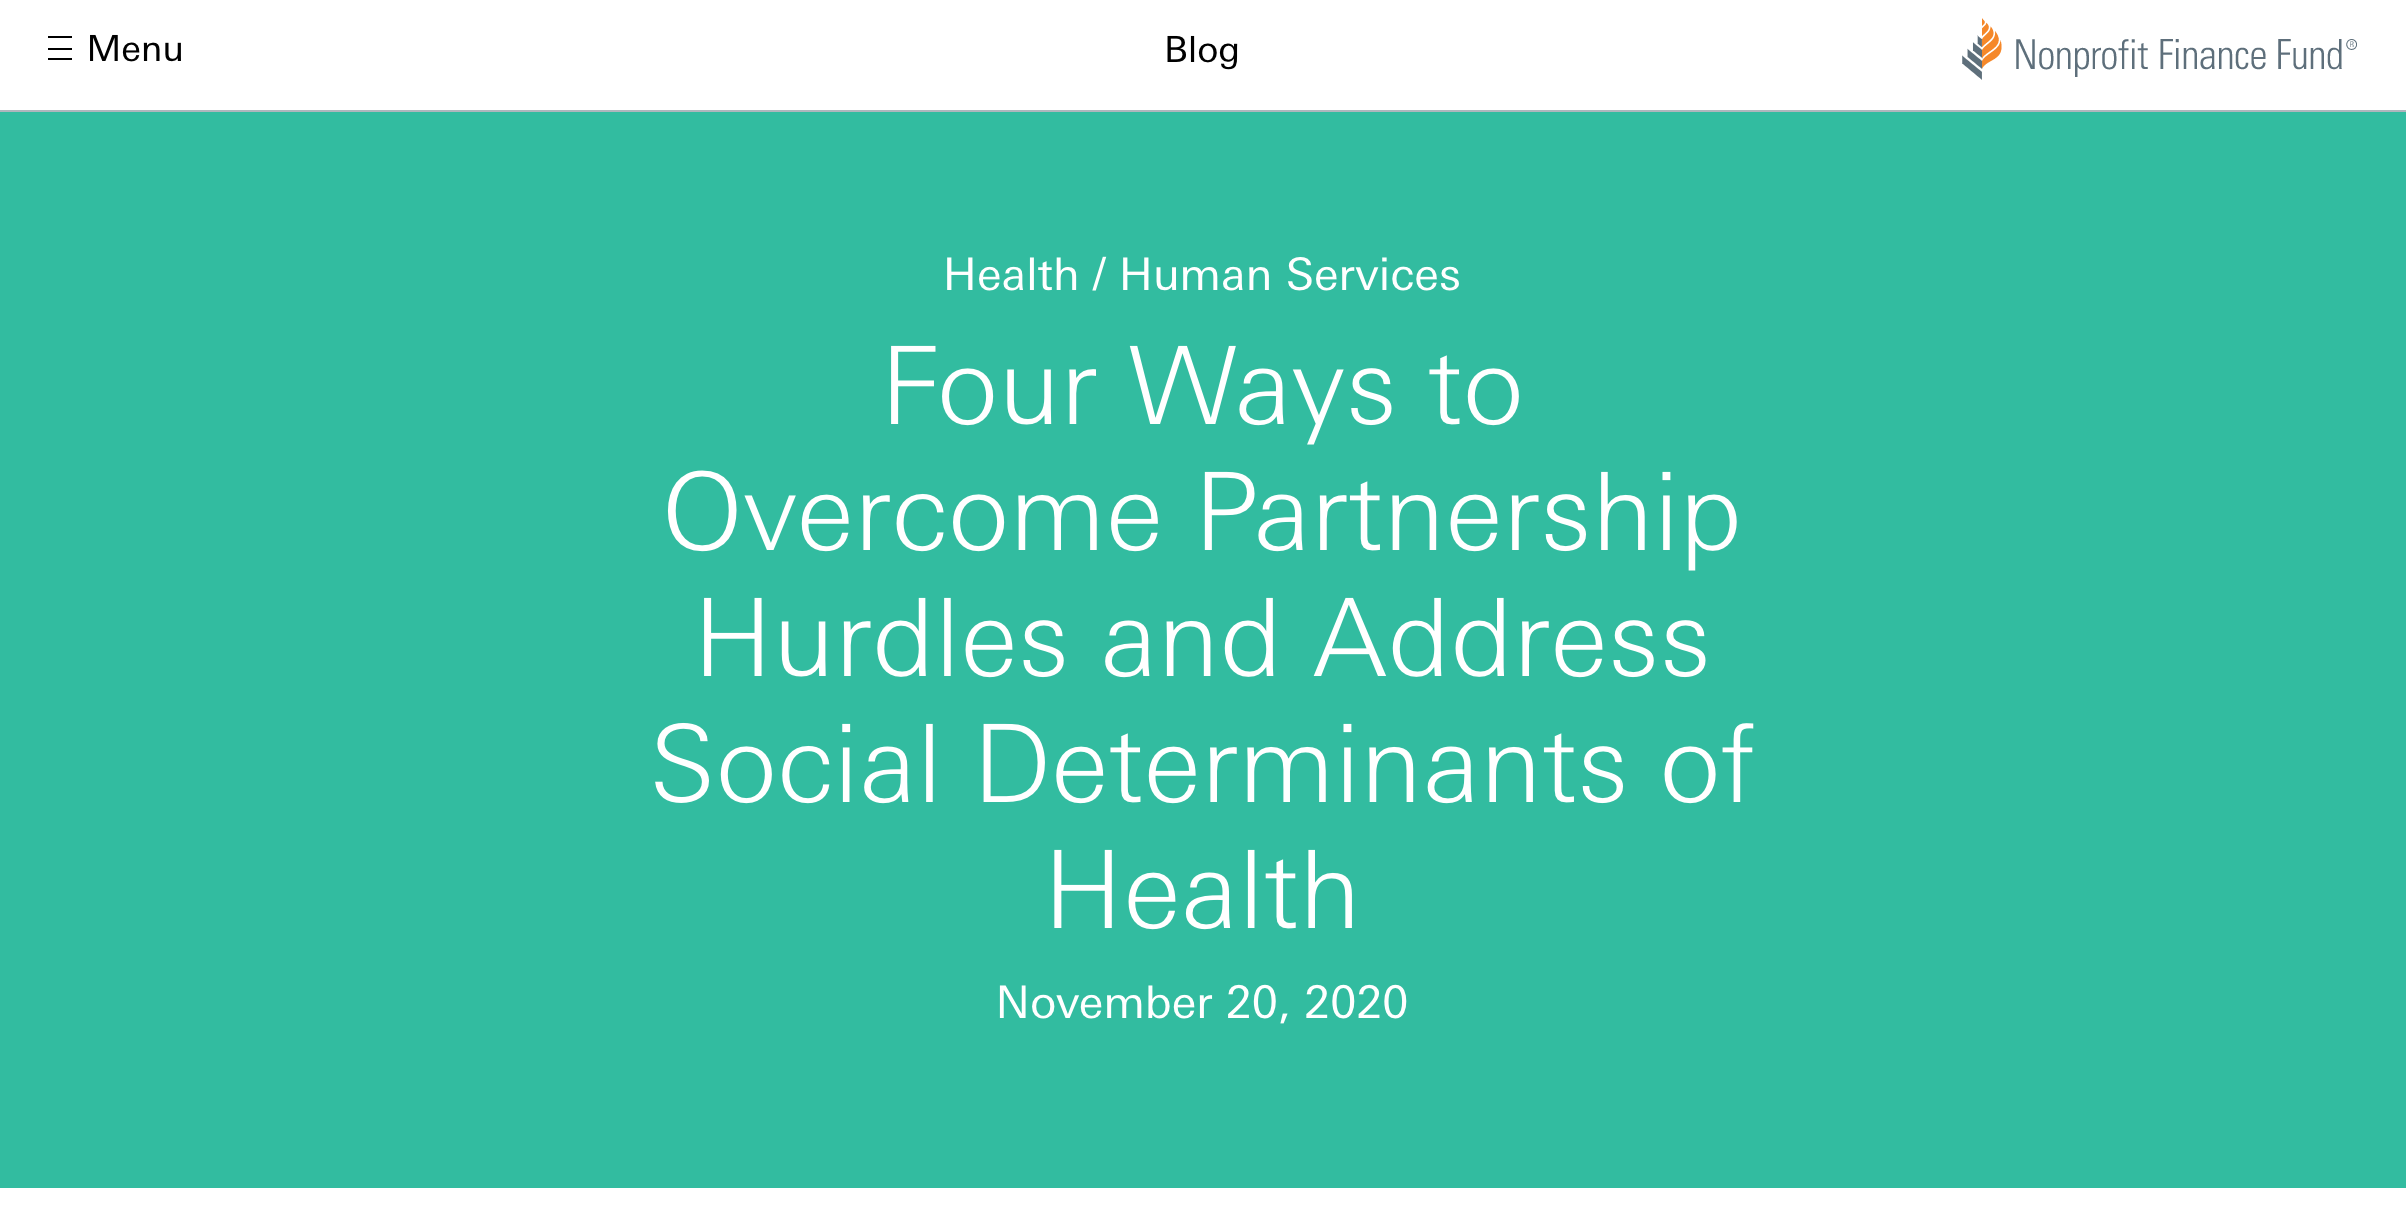 Four Ways to Overcome Partnership Hurdles and Address Social Determinants of Health